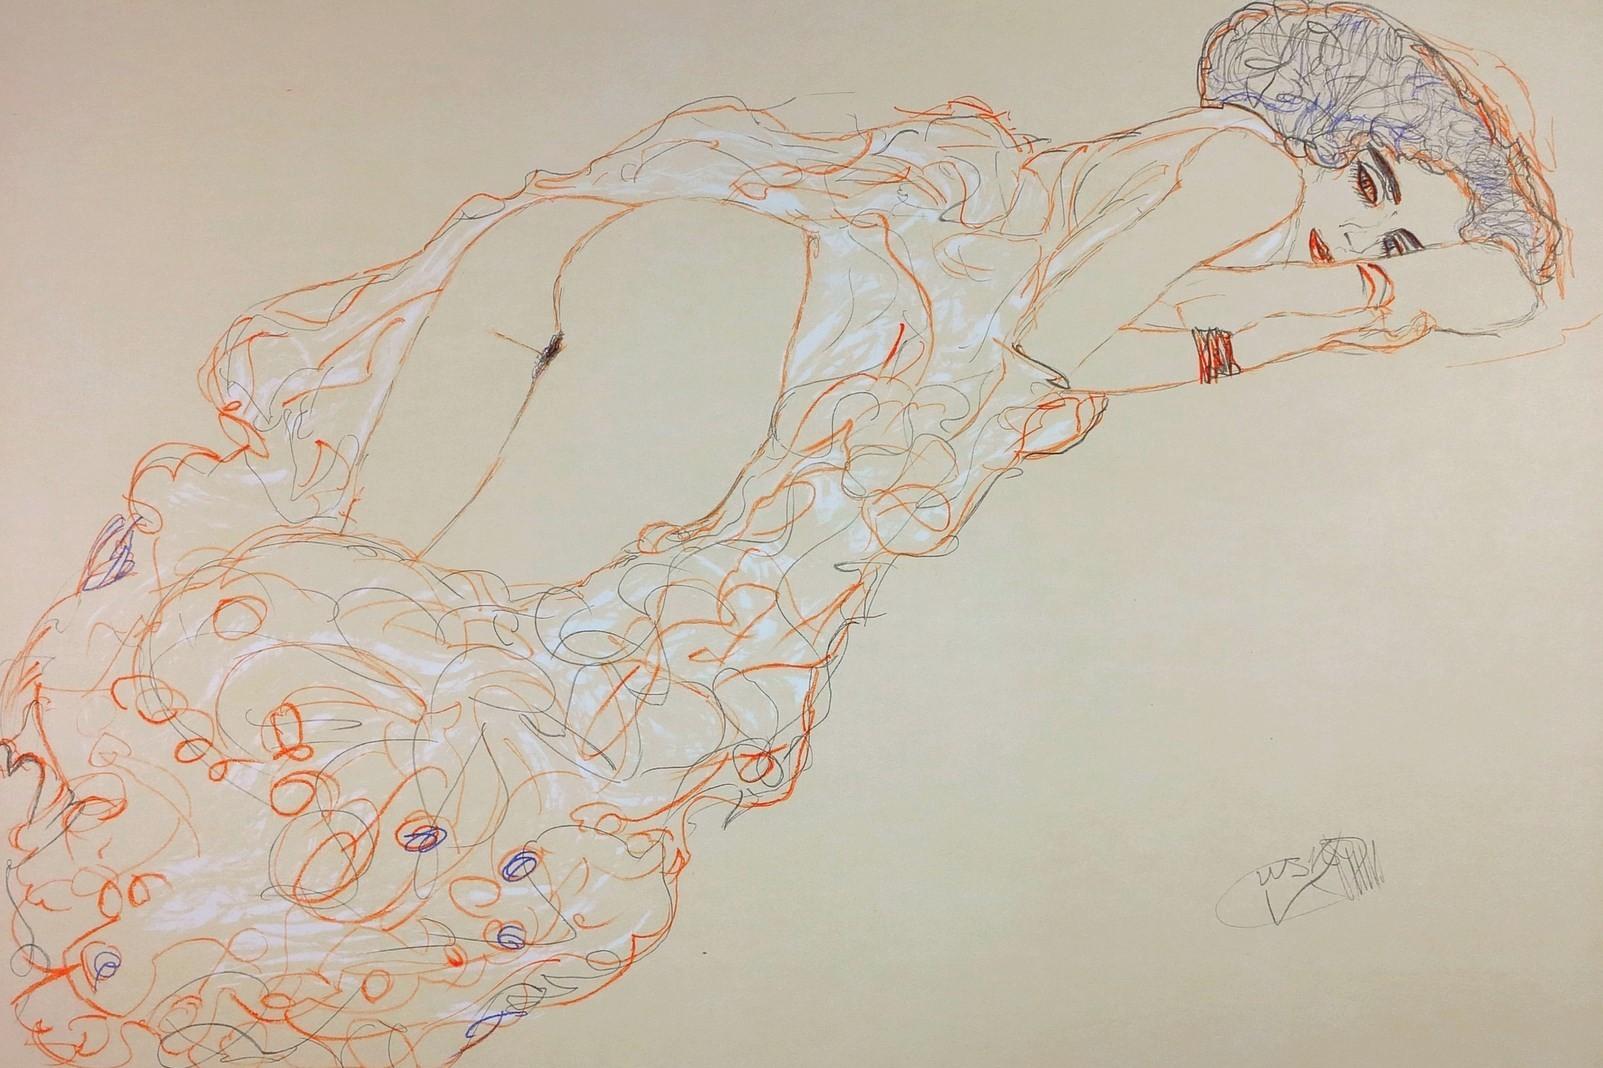 Gutav KLIMT | Lithograph |  The girl with a full-lenght dress - 1910 (Reclining Nude Lying on Her Stomach and Facing Right / Auf dem Bauch liegender Halbakt nach rechts)